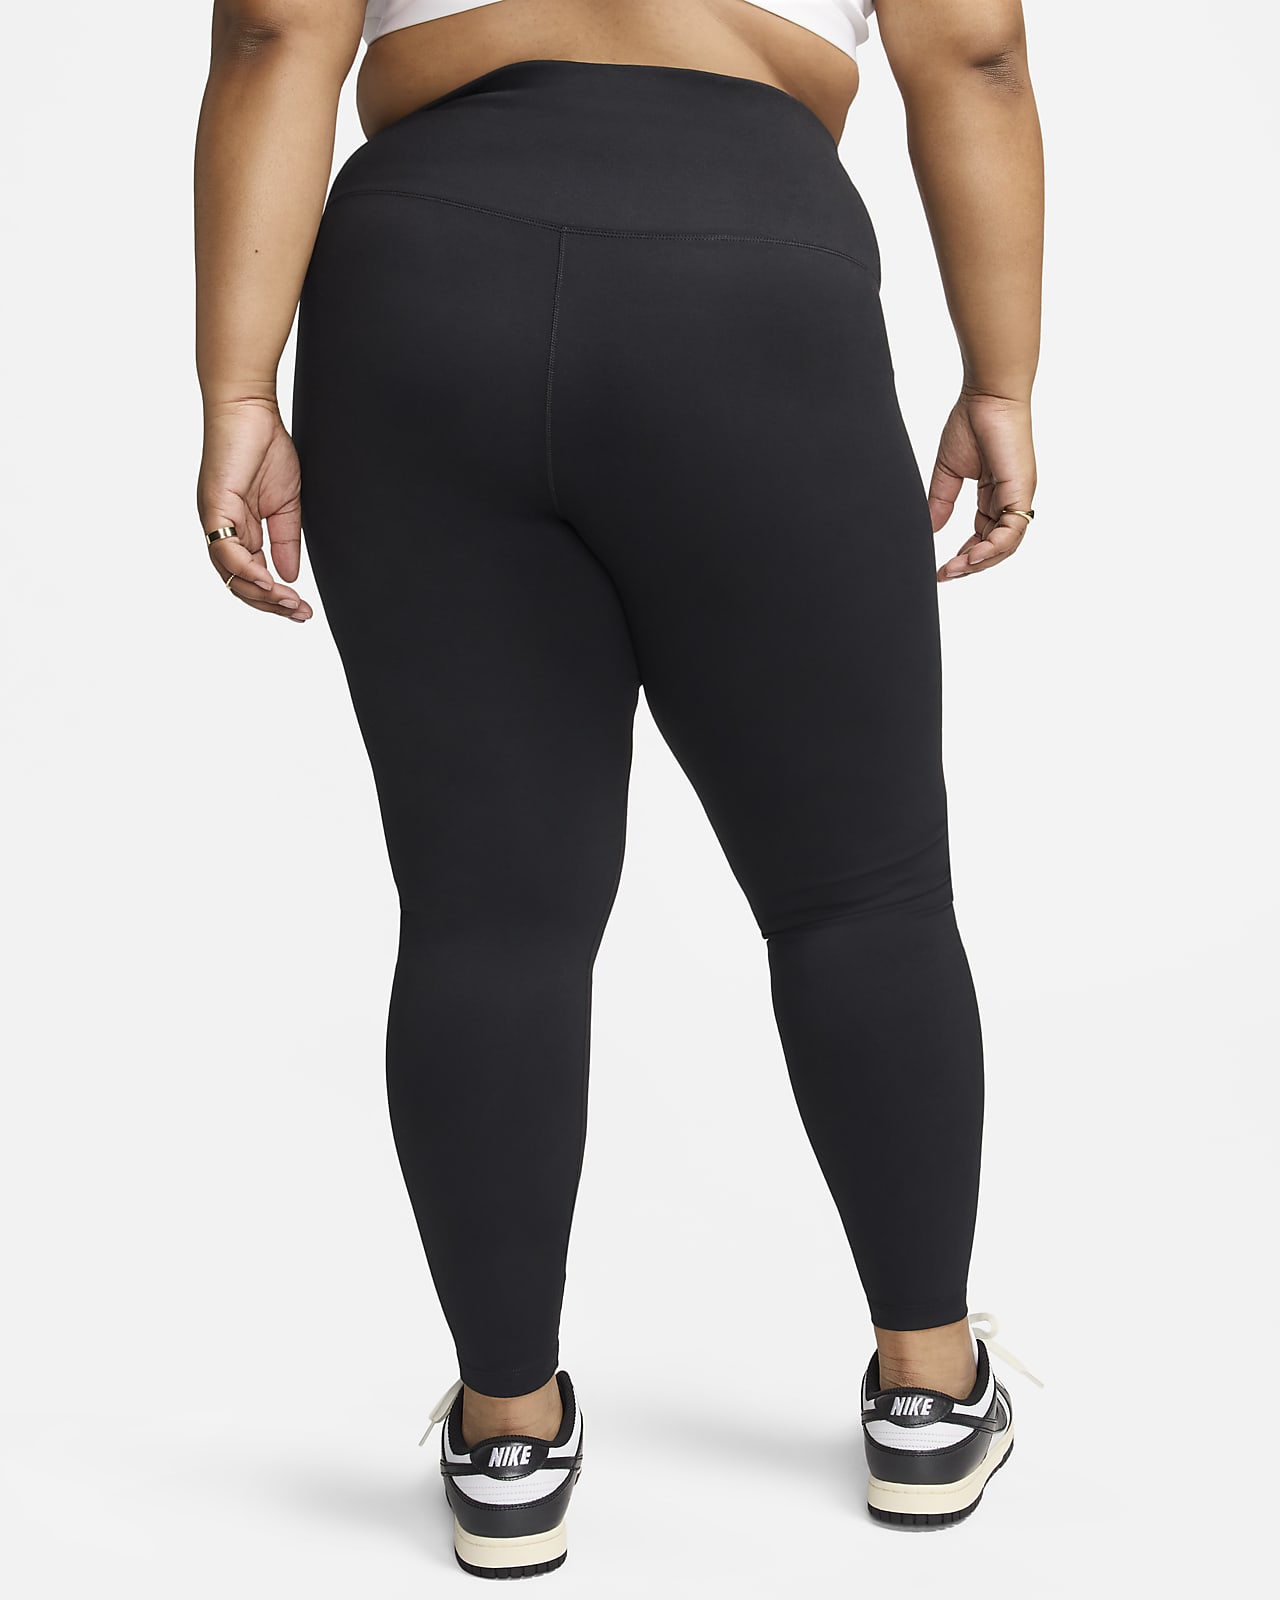 Nike Womens Large Leggings. New With Tags!